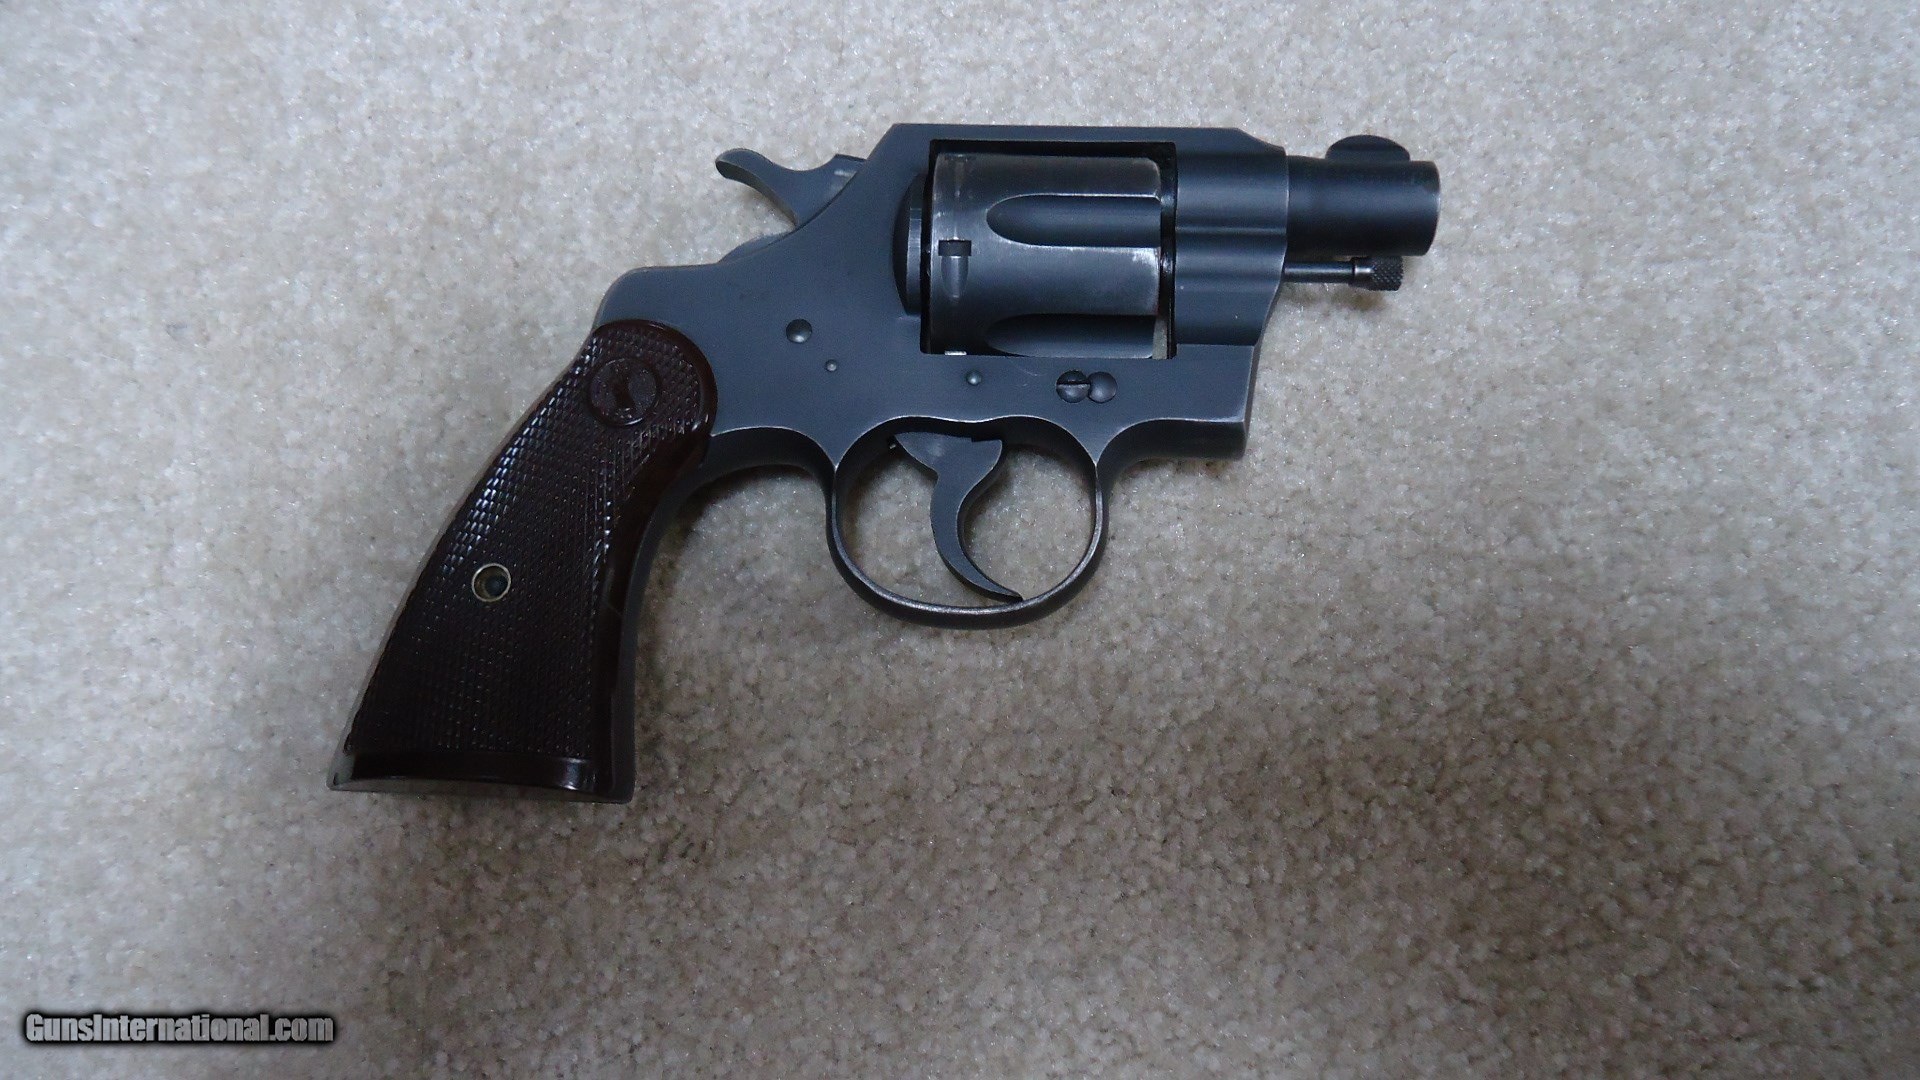 EARLY AND EXTREMELY SCARCE WORLD WAR II COLT COMMANDO REVOLVER